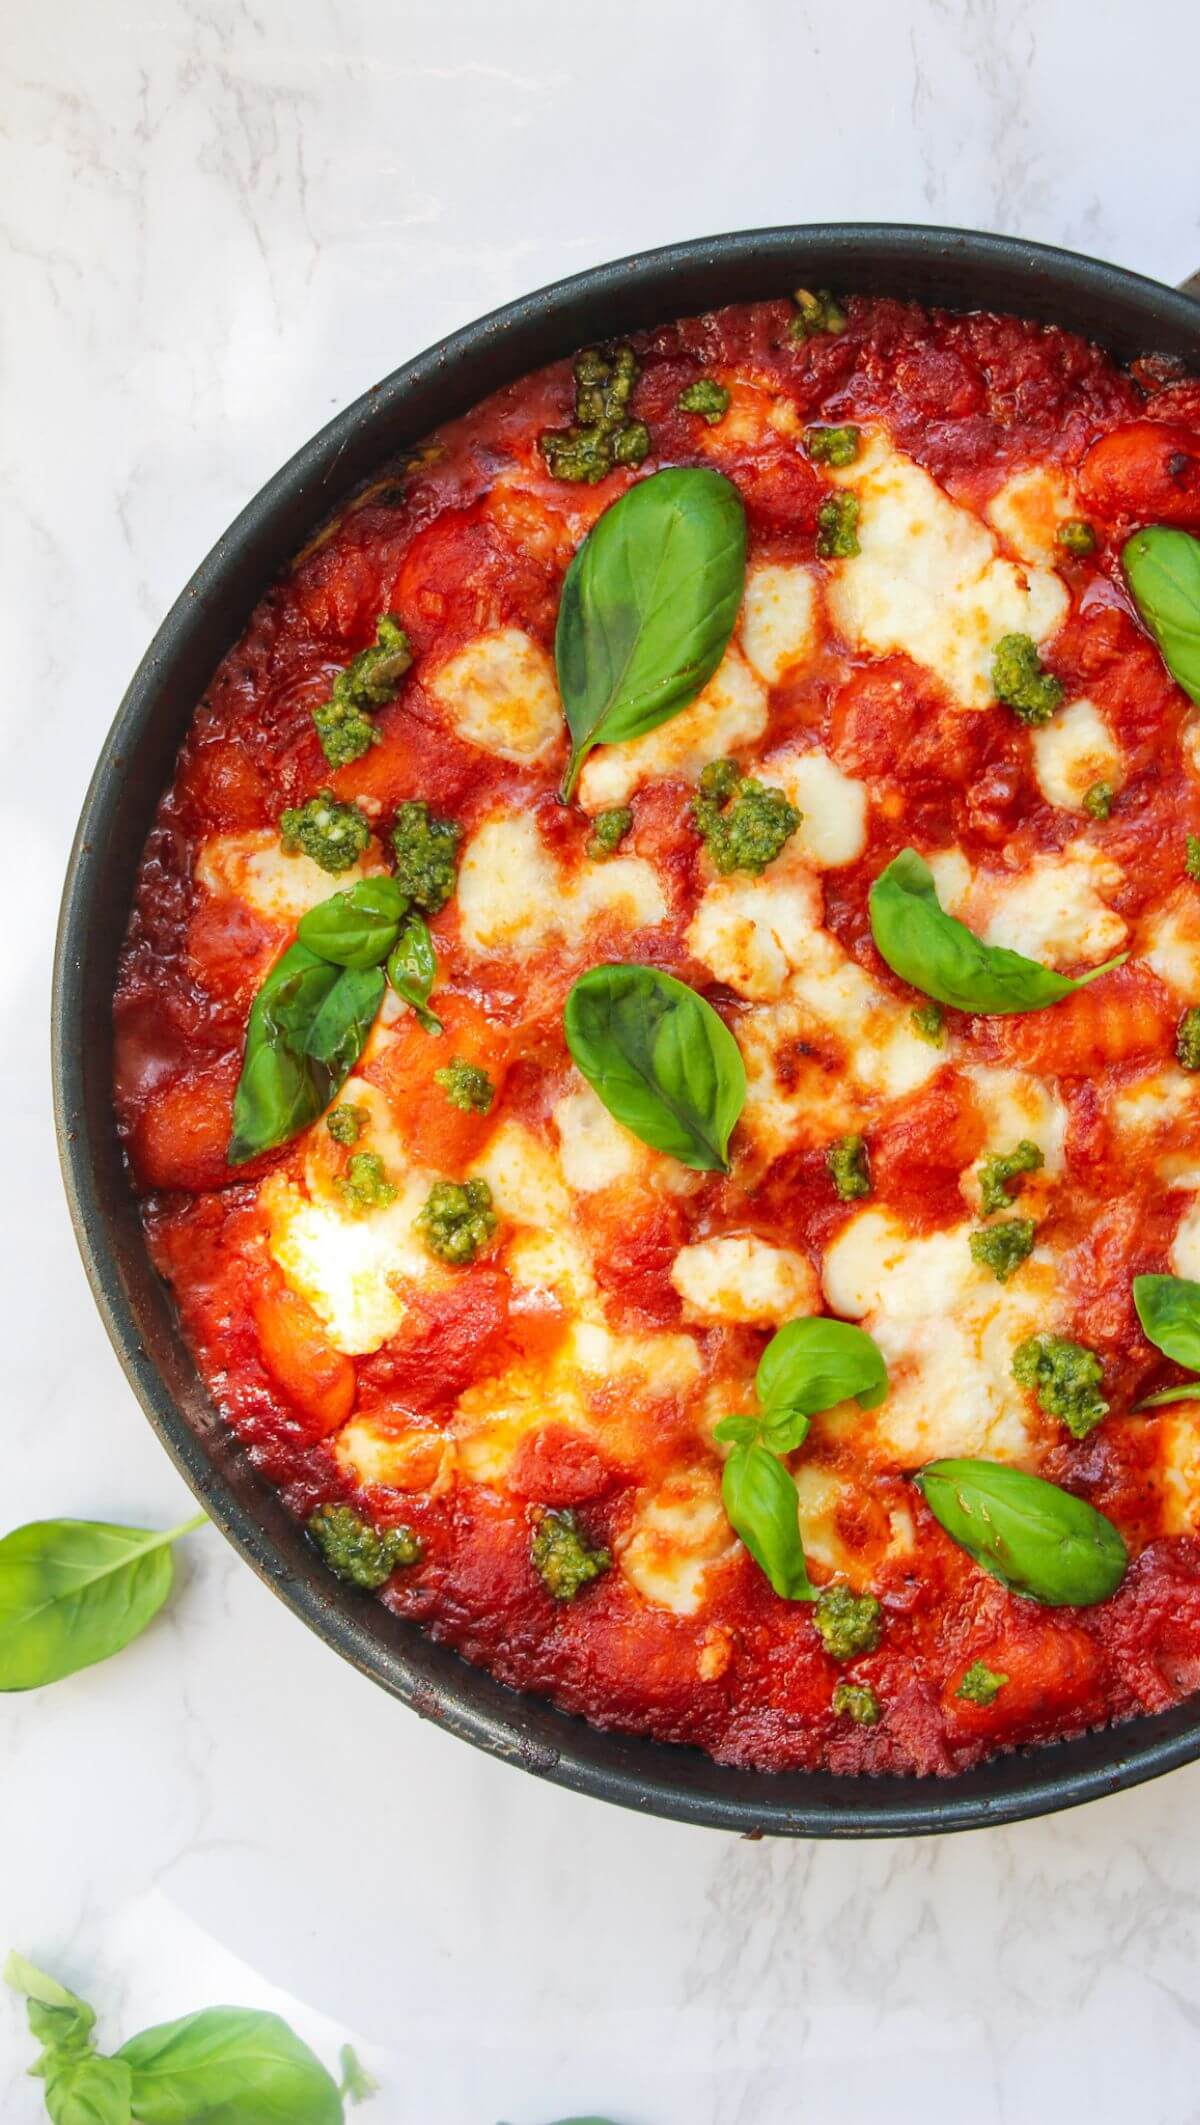 Mozzarella topped gnocchi alla sorrentina in a small frying pan, topped with basil leaves.